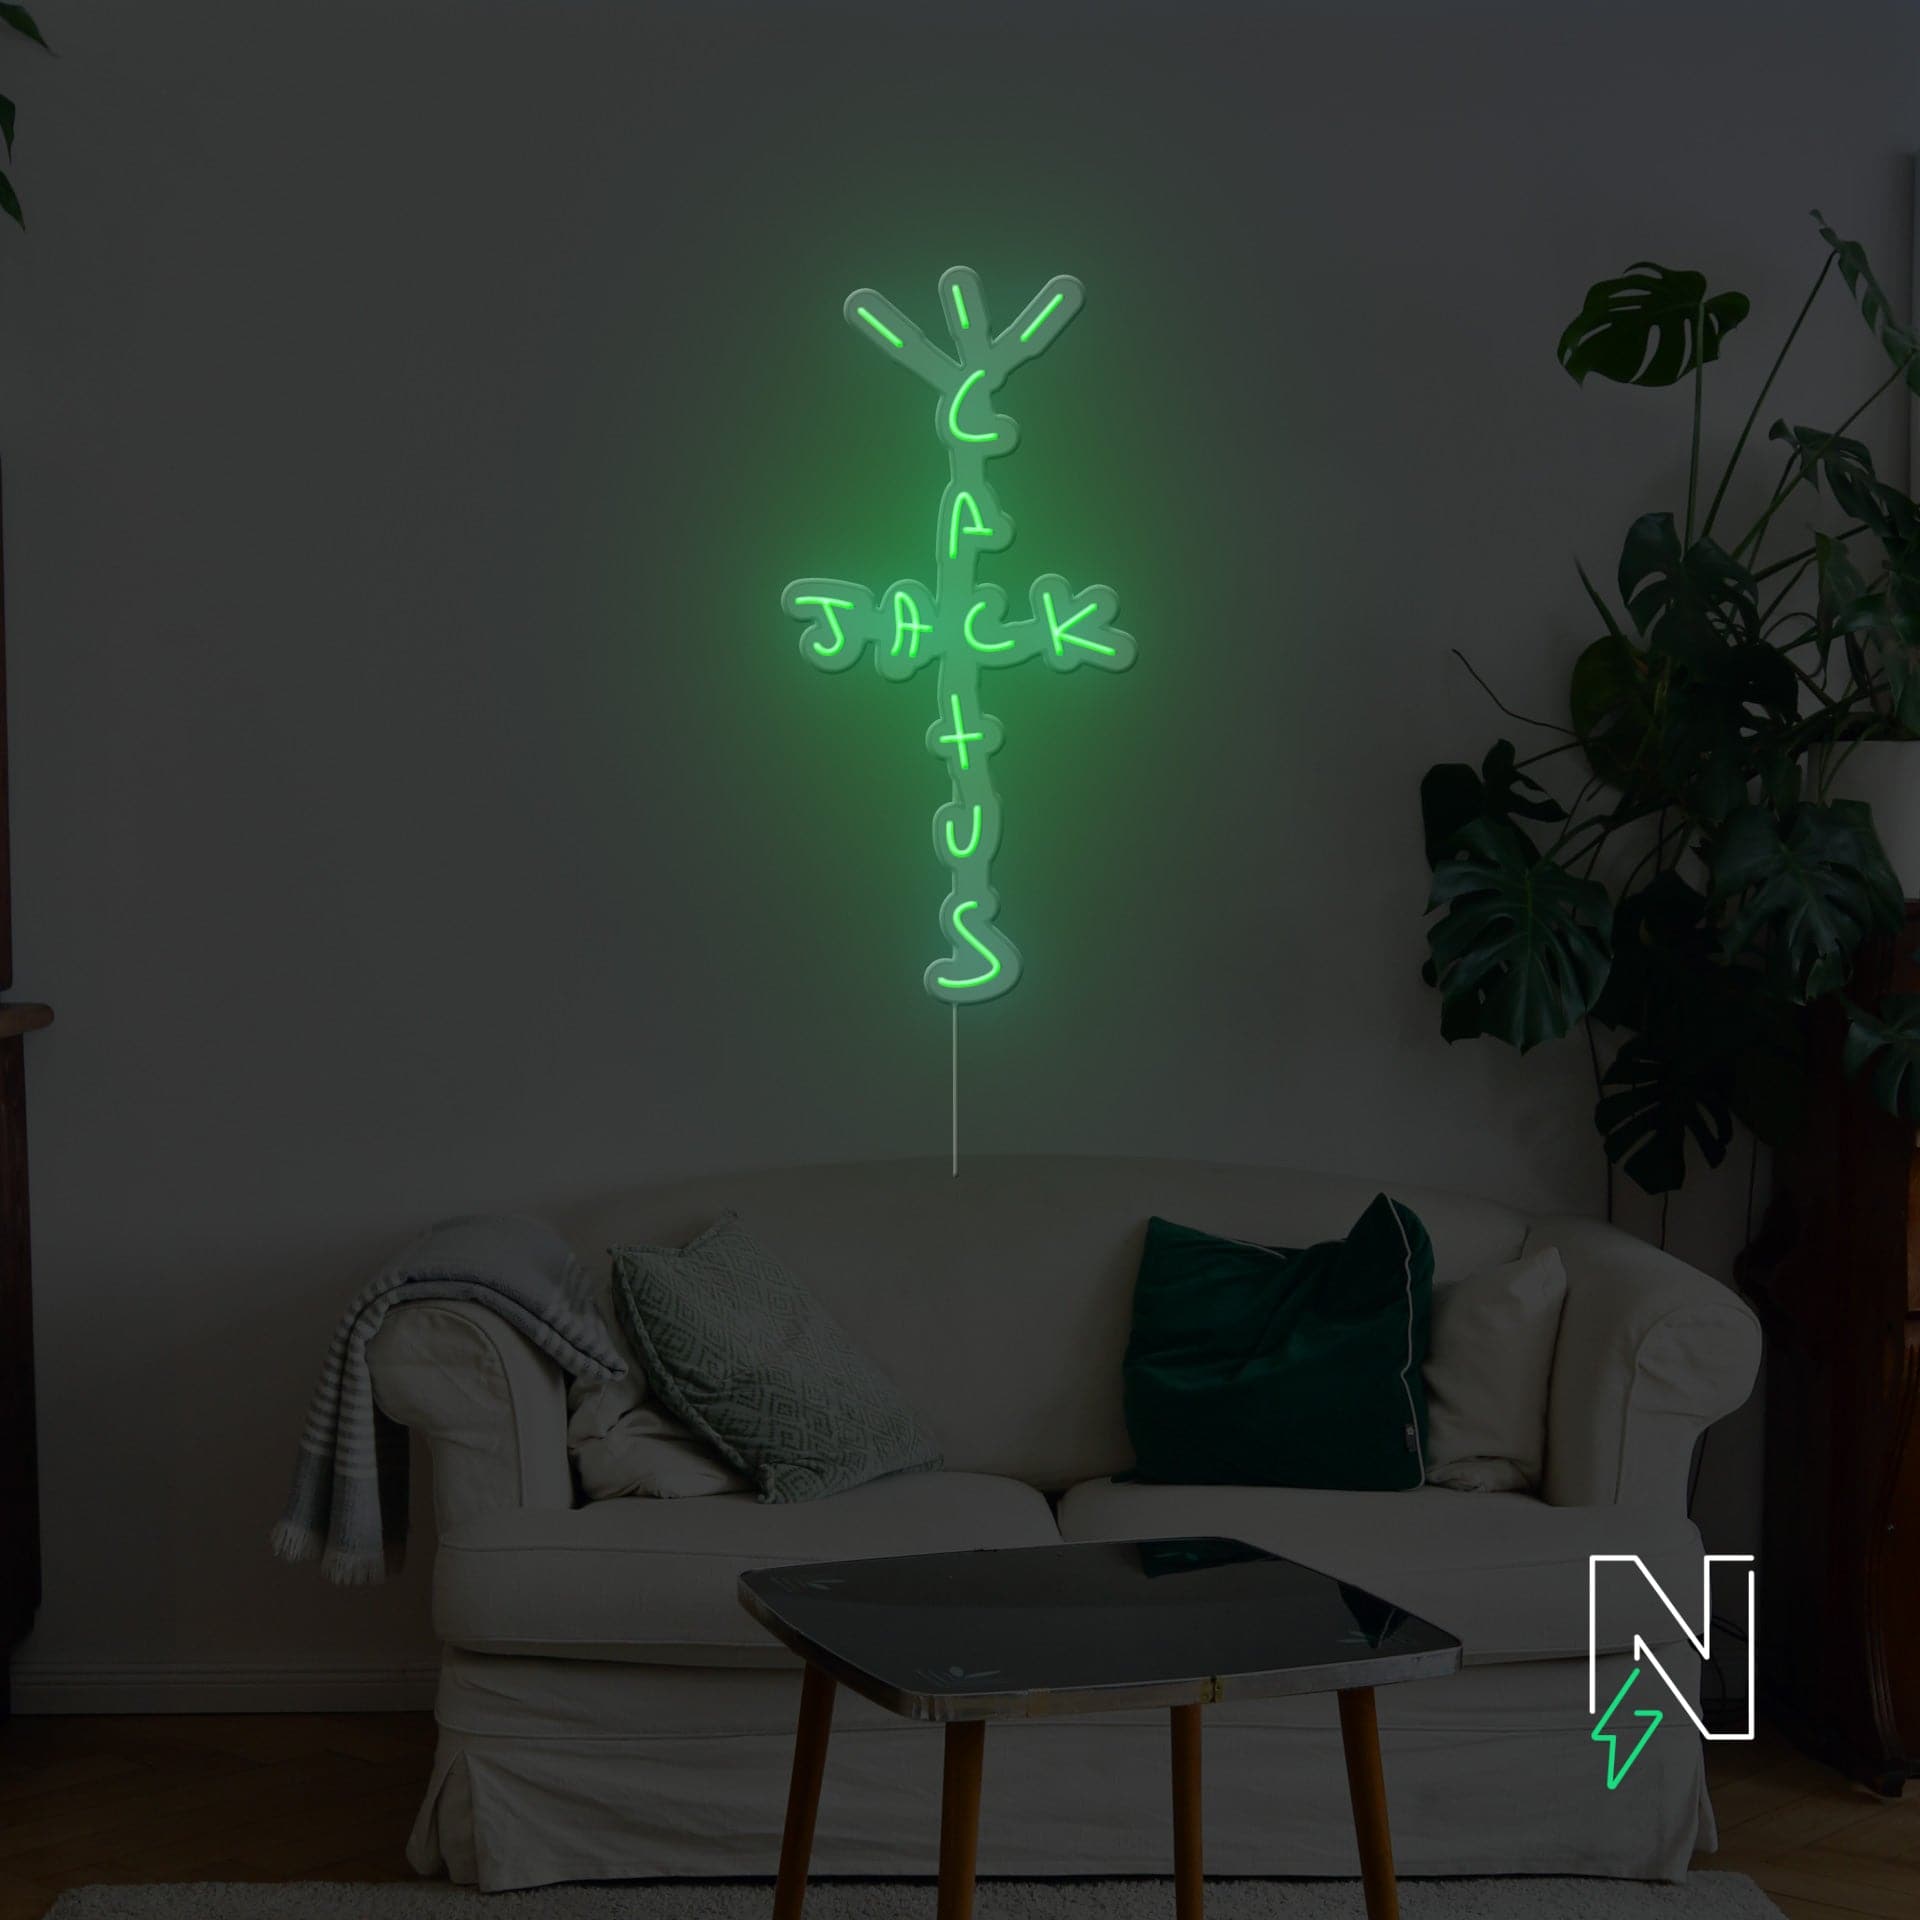 Buy Cactus Jack Neon Sign Online at the Best Price | Neon Attack ...